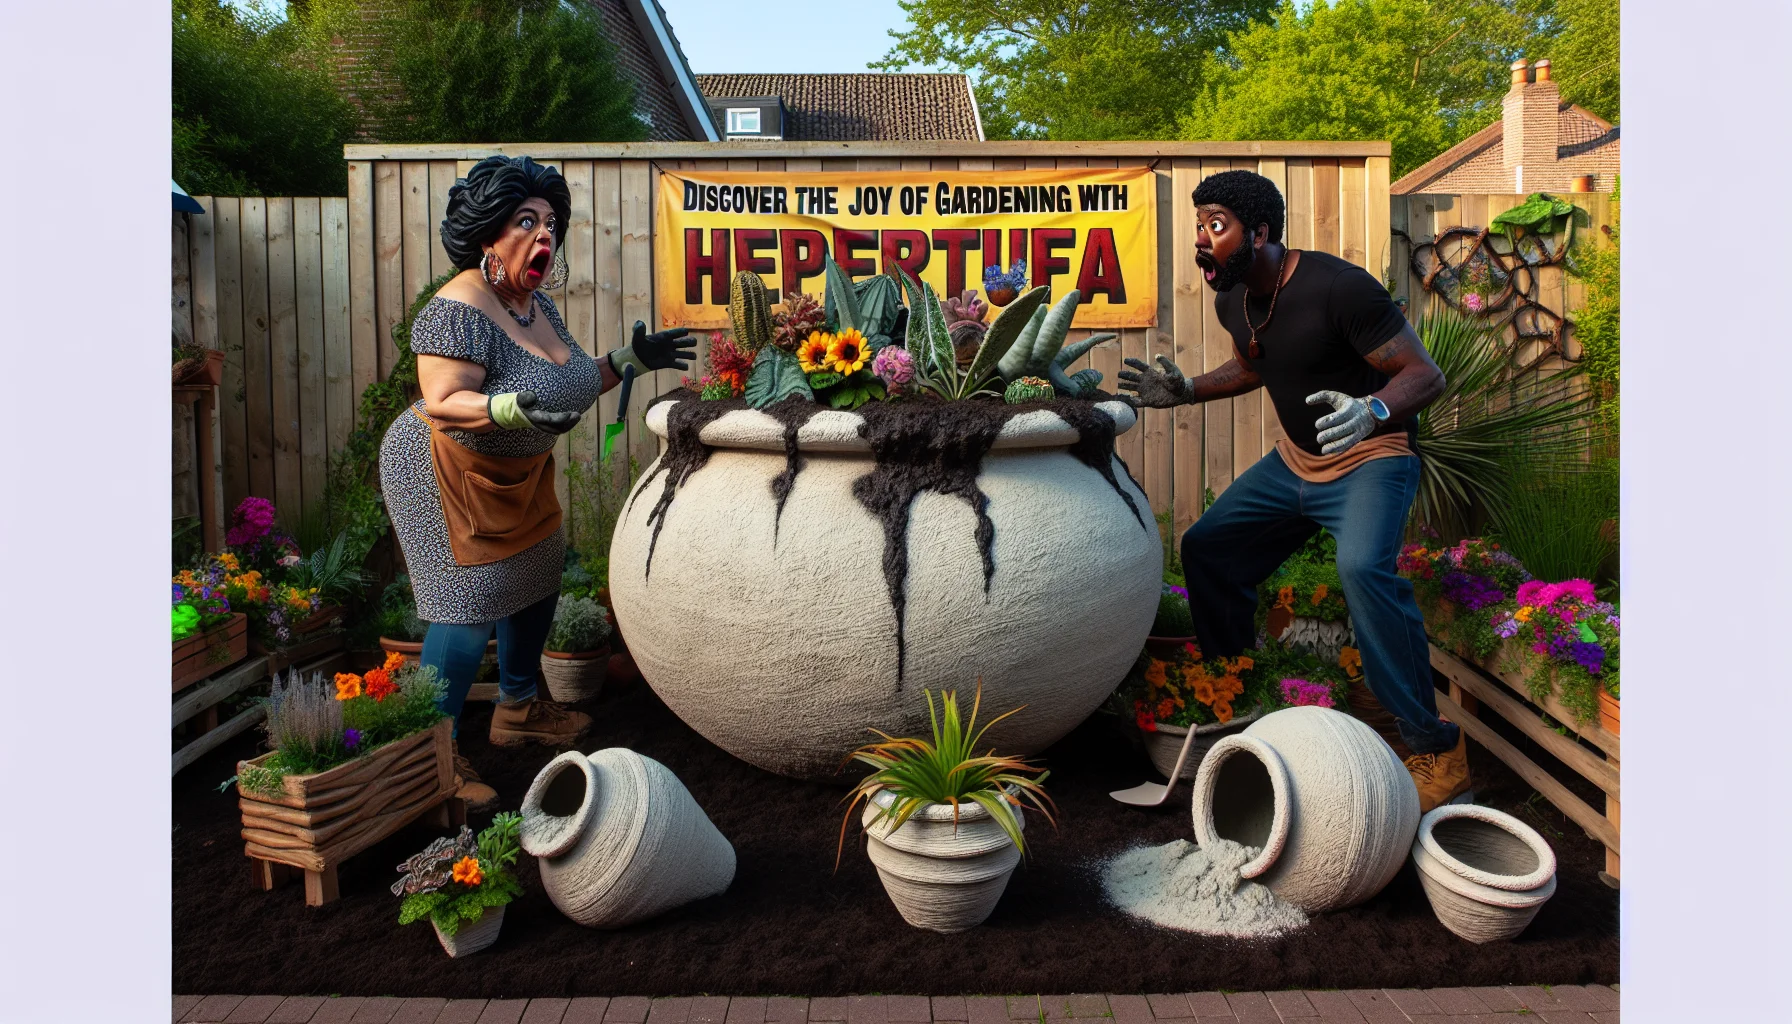 An enticing and humorous scene related to the exploration of Hypertufa. The setting is an outdoor garden bathed in afternoon sunlight. A Hispanic woman with well-used gardening tools is knee-deep in a Hypertufa plant bed full of exotic plants, while a Black man stands next to a gigantic home-made Hypertufa plant pot that's about to tip over. The face of both individuals exhibit a mix of shock and amusement. An assortment of Hypertufa pots with varying shapes and sizes lay scattered around them, some overflowing with vibrant flowers. A large banner in the background reads: 'Discover The Joy of Gardening With Hypertufa'.